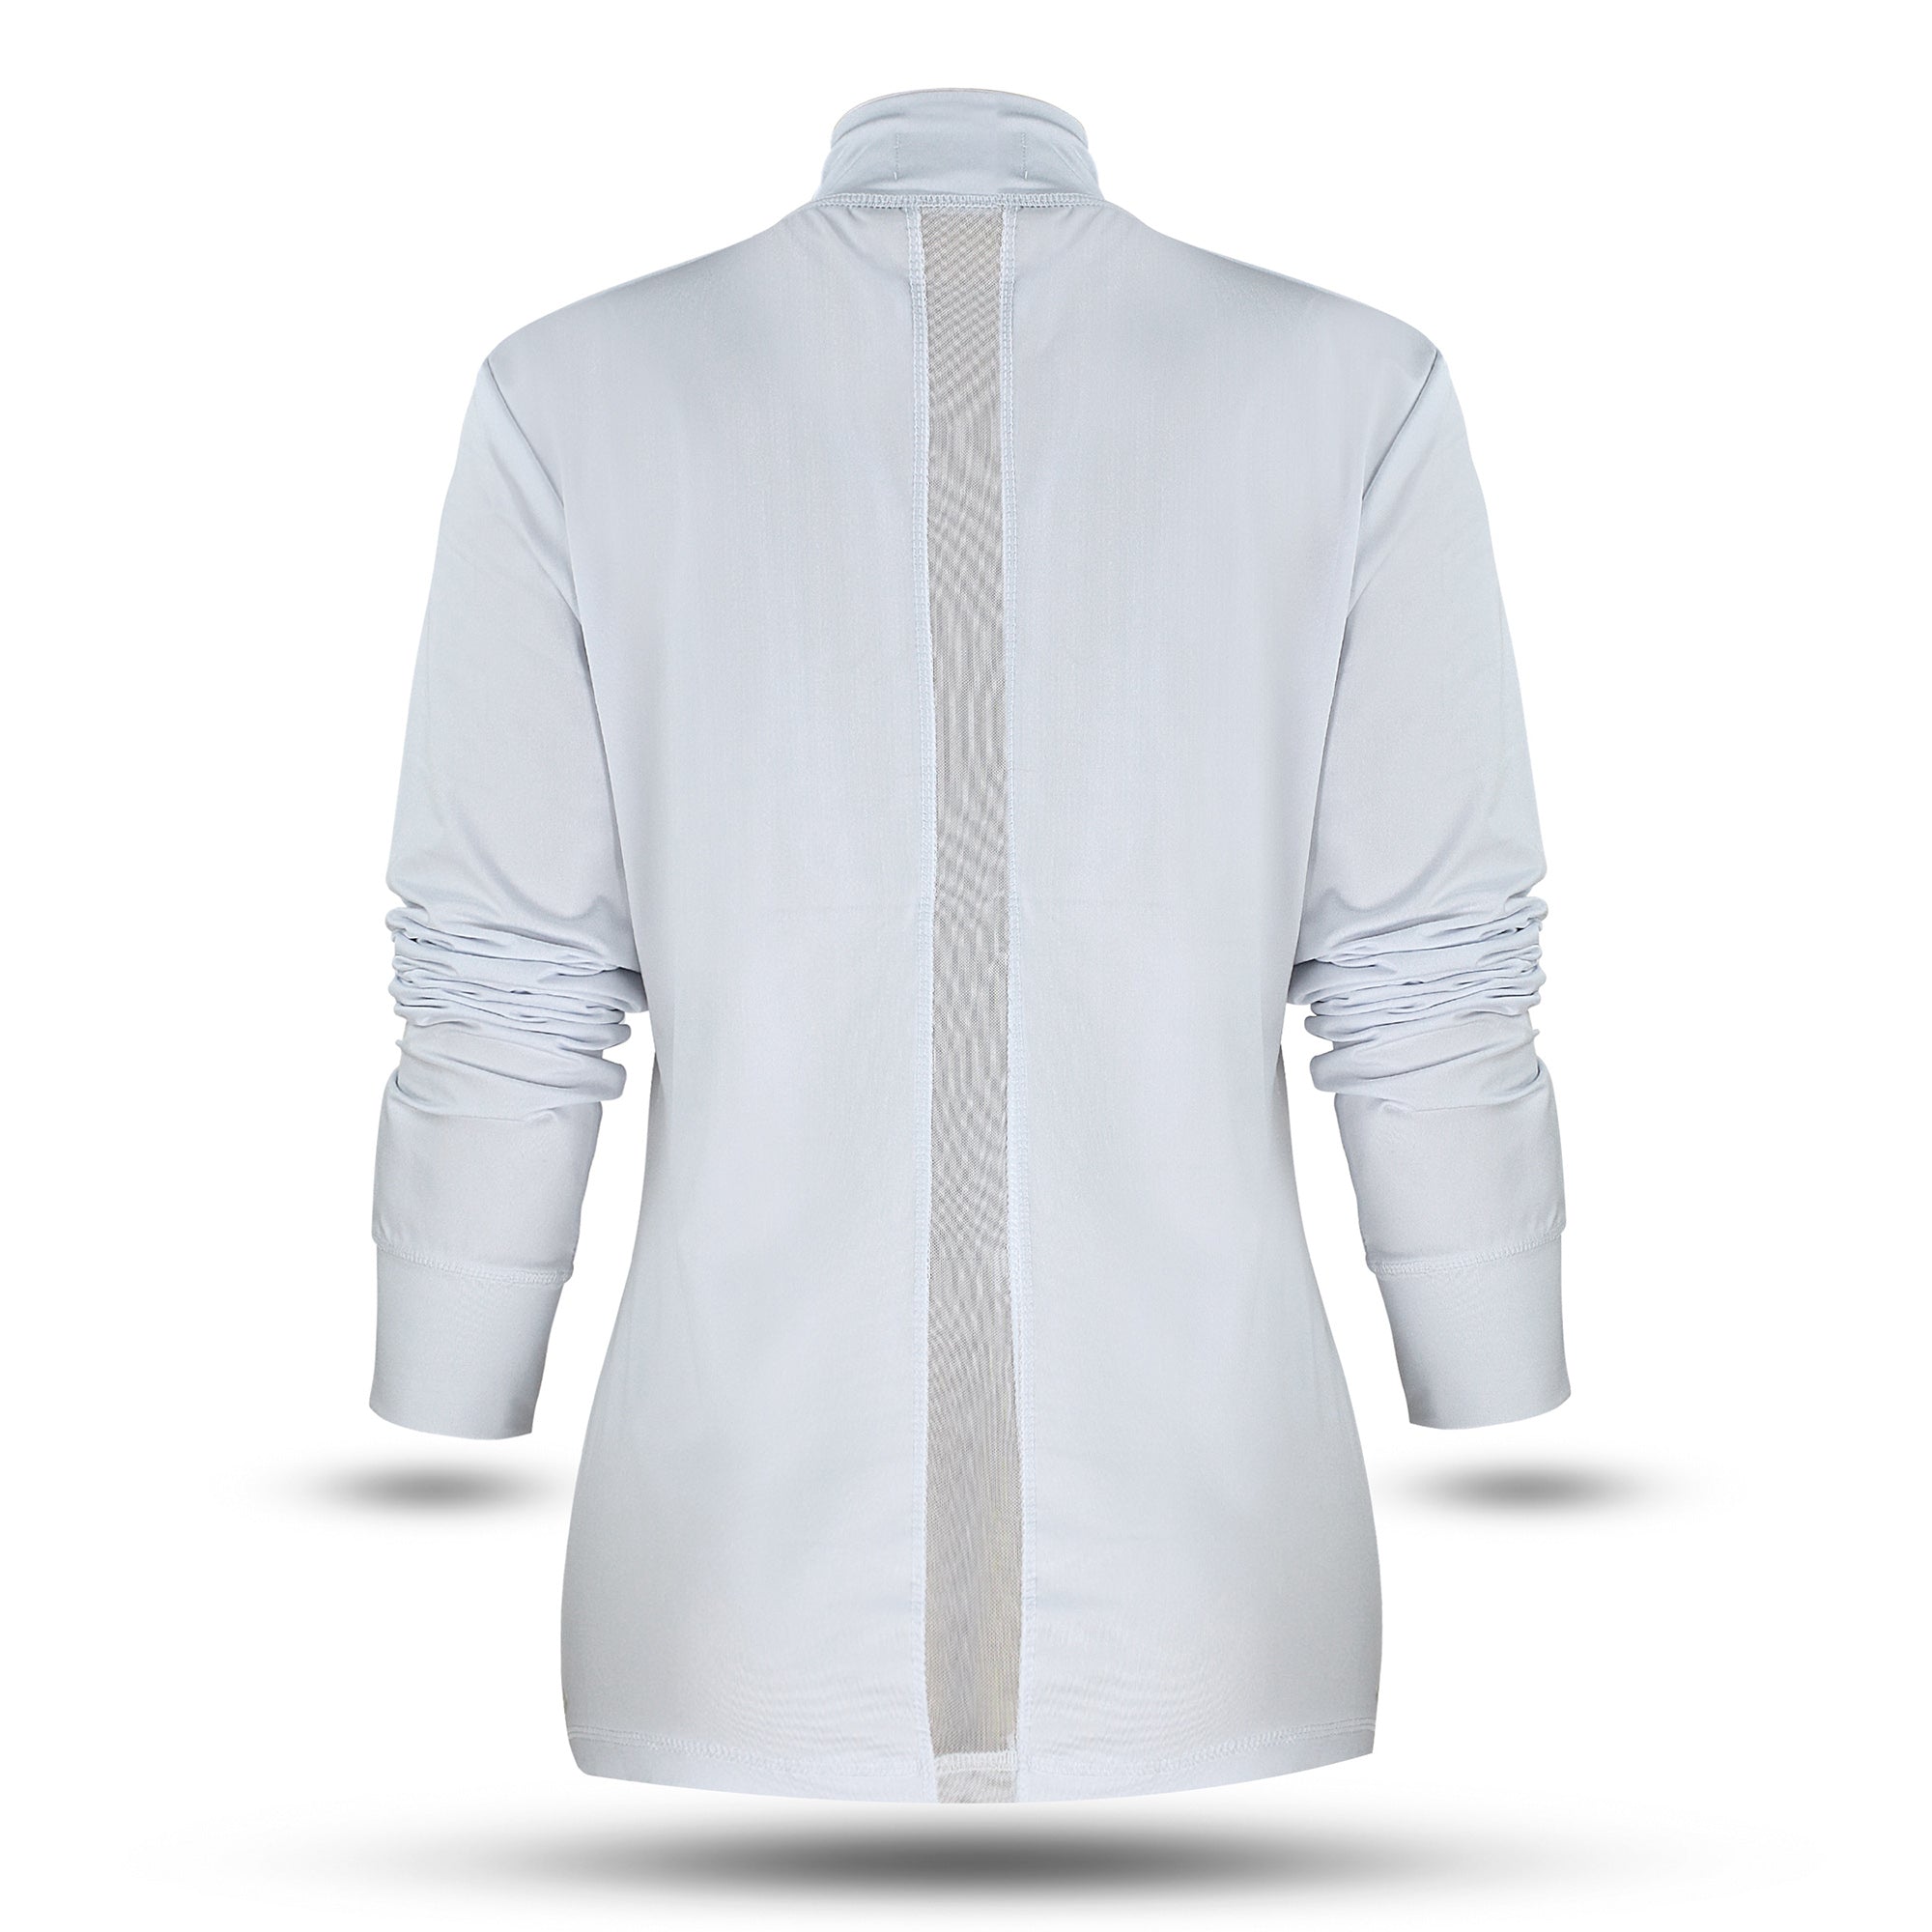 ***ELITE COLLECTION**** White Jacket Styled with Mesh Inserts